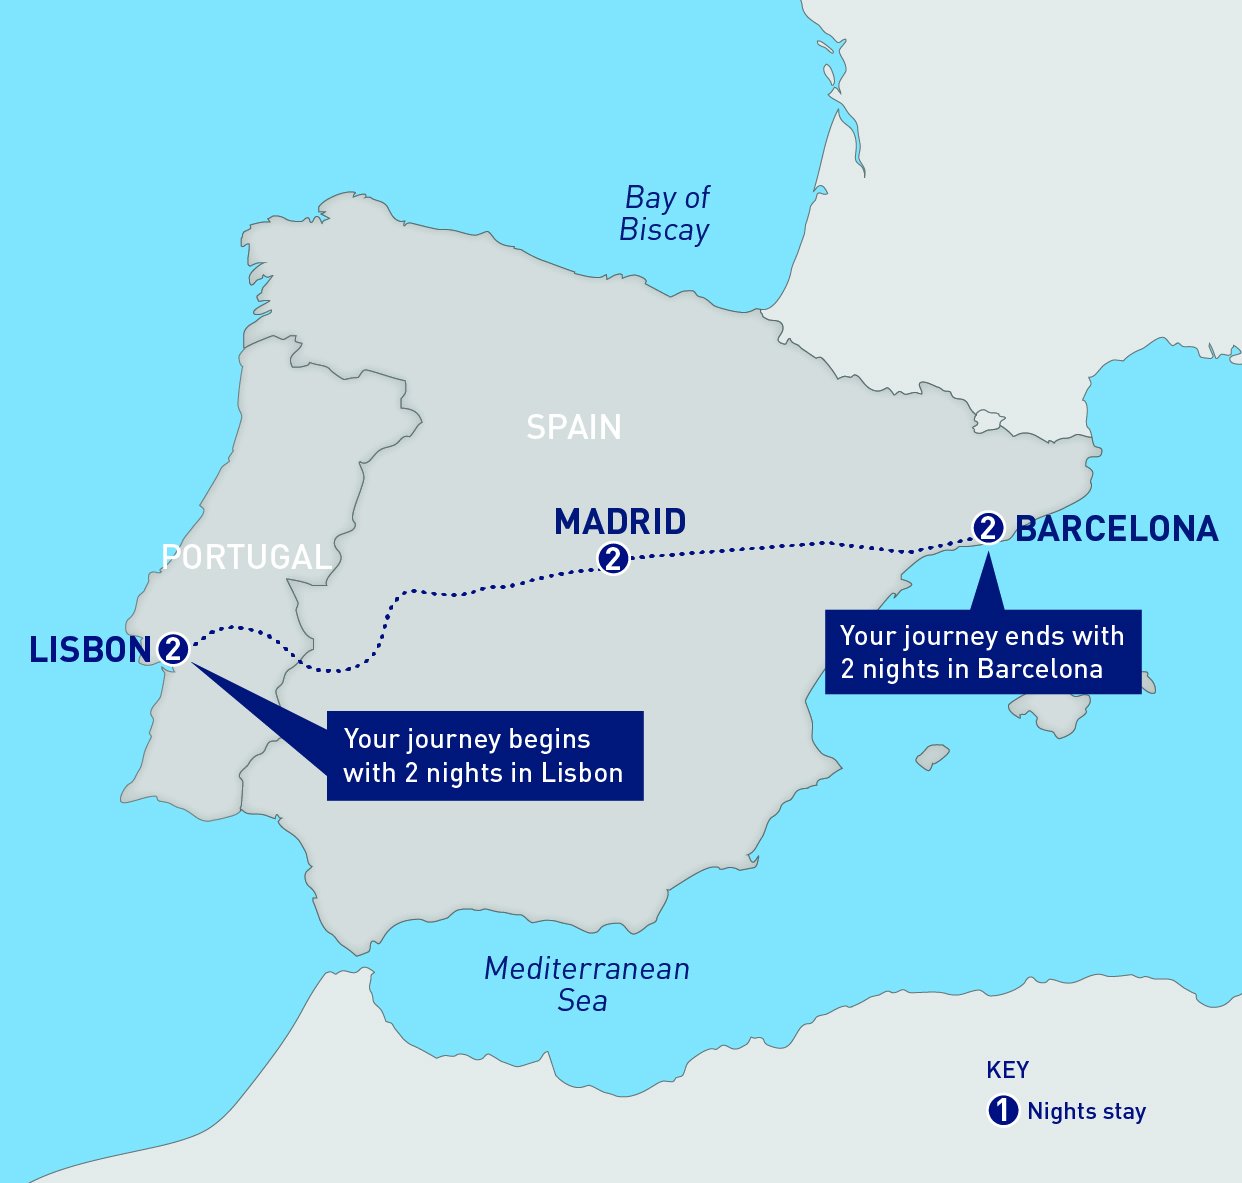 Itinerary mapped out from Lisbon Portugal to Barcelona